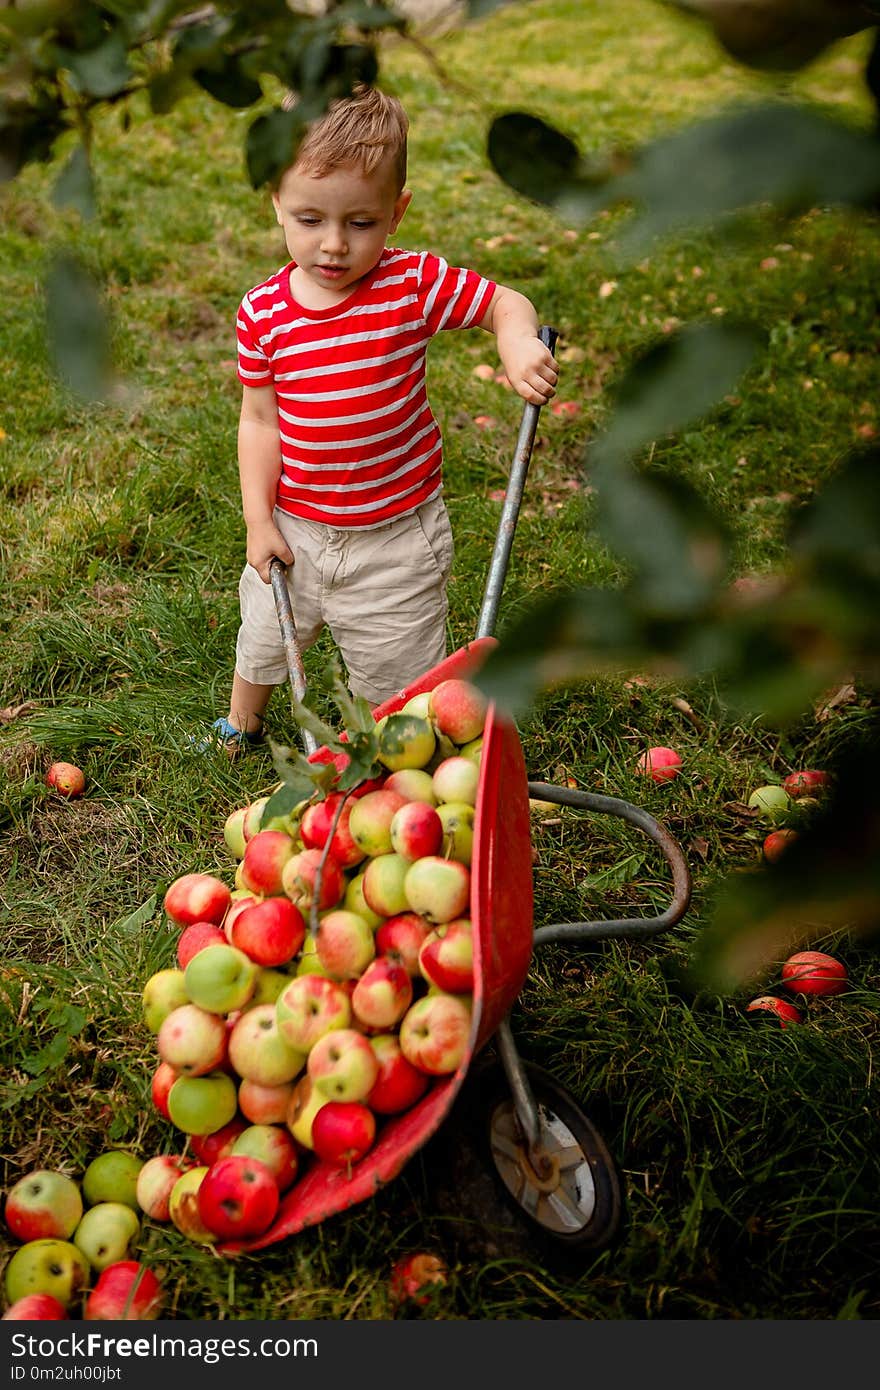 Child picking apples on a farm. Little boy playing in apple tree orchard. Kid pick fruit and put them in a wheelbarrow. Baby eating healthy fruits at fall harvest. Outdoor fun for children.